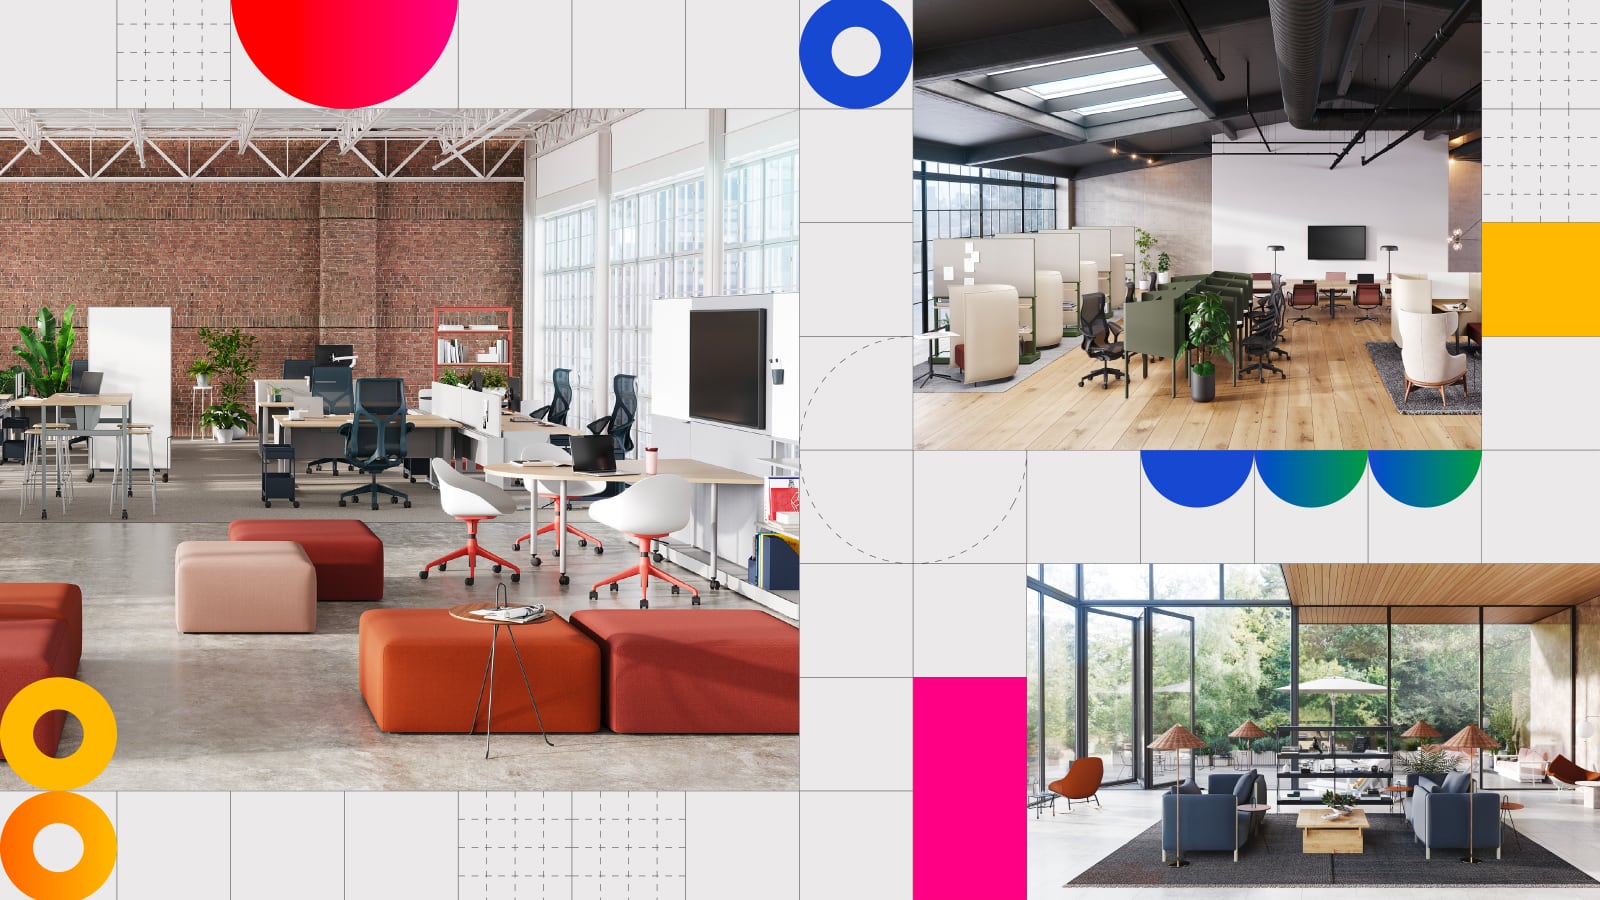 Collage of brightly colored graphic shapes and images of different types of office environments, illustrating spaces for socialization, collaboration, and focus.